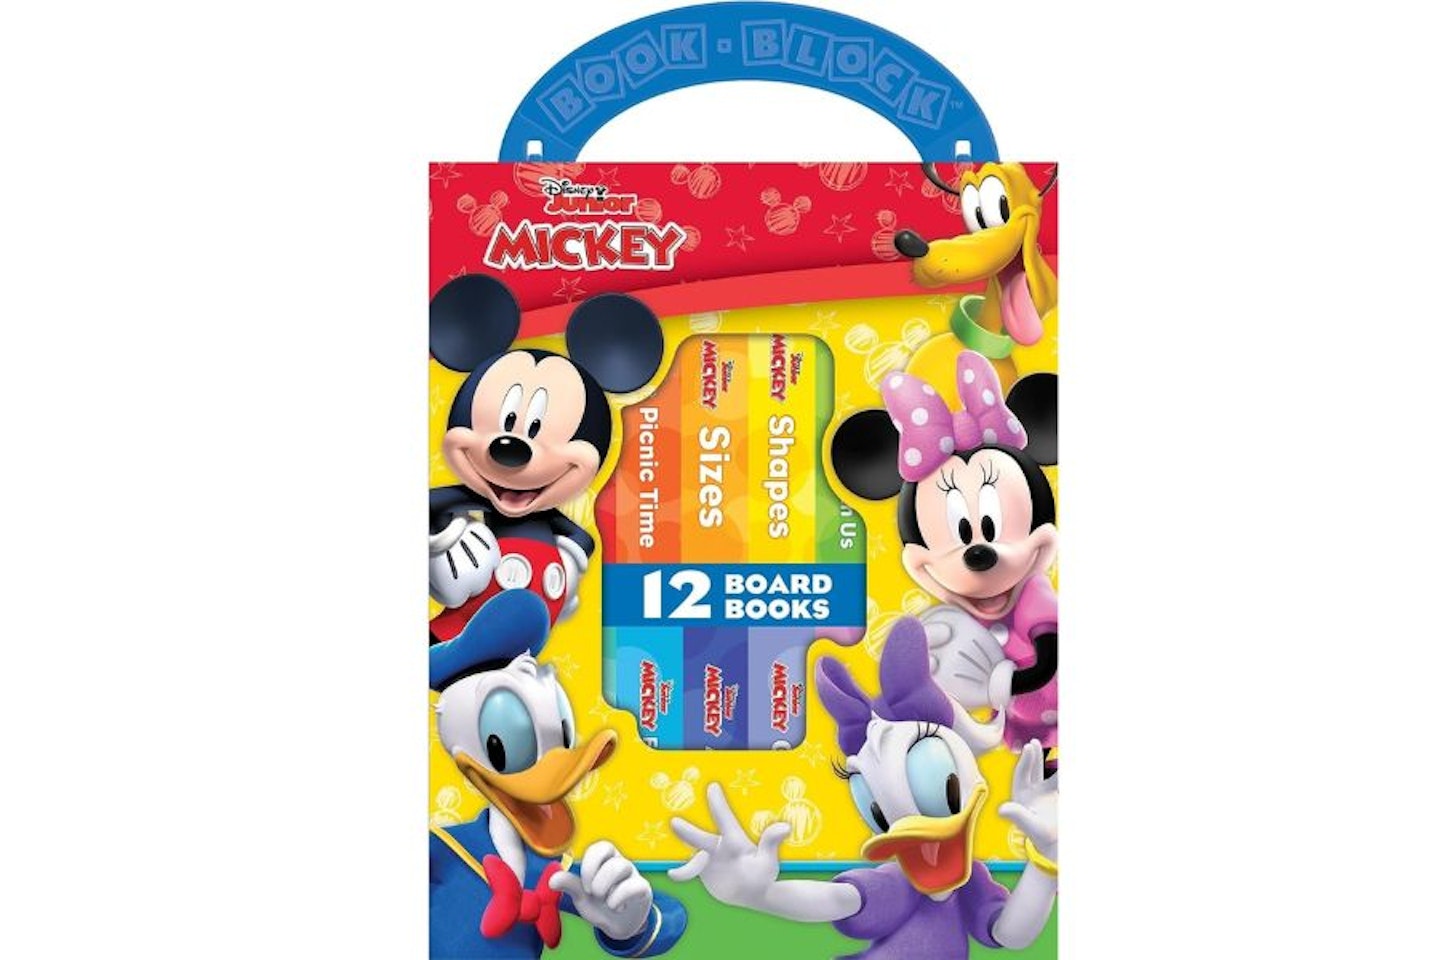 Disney Junior - Best Mickey Mouse products